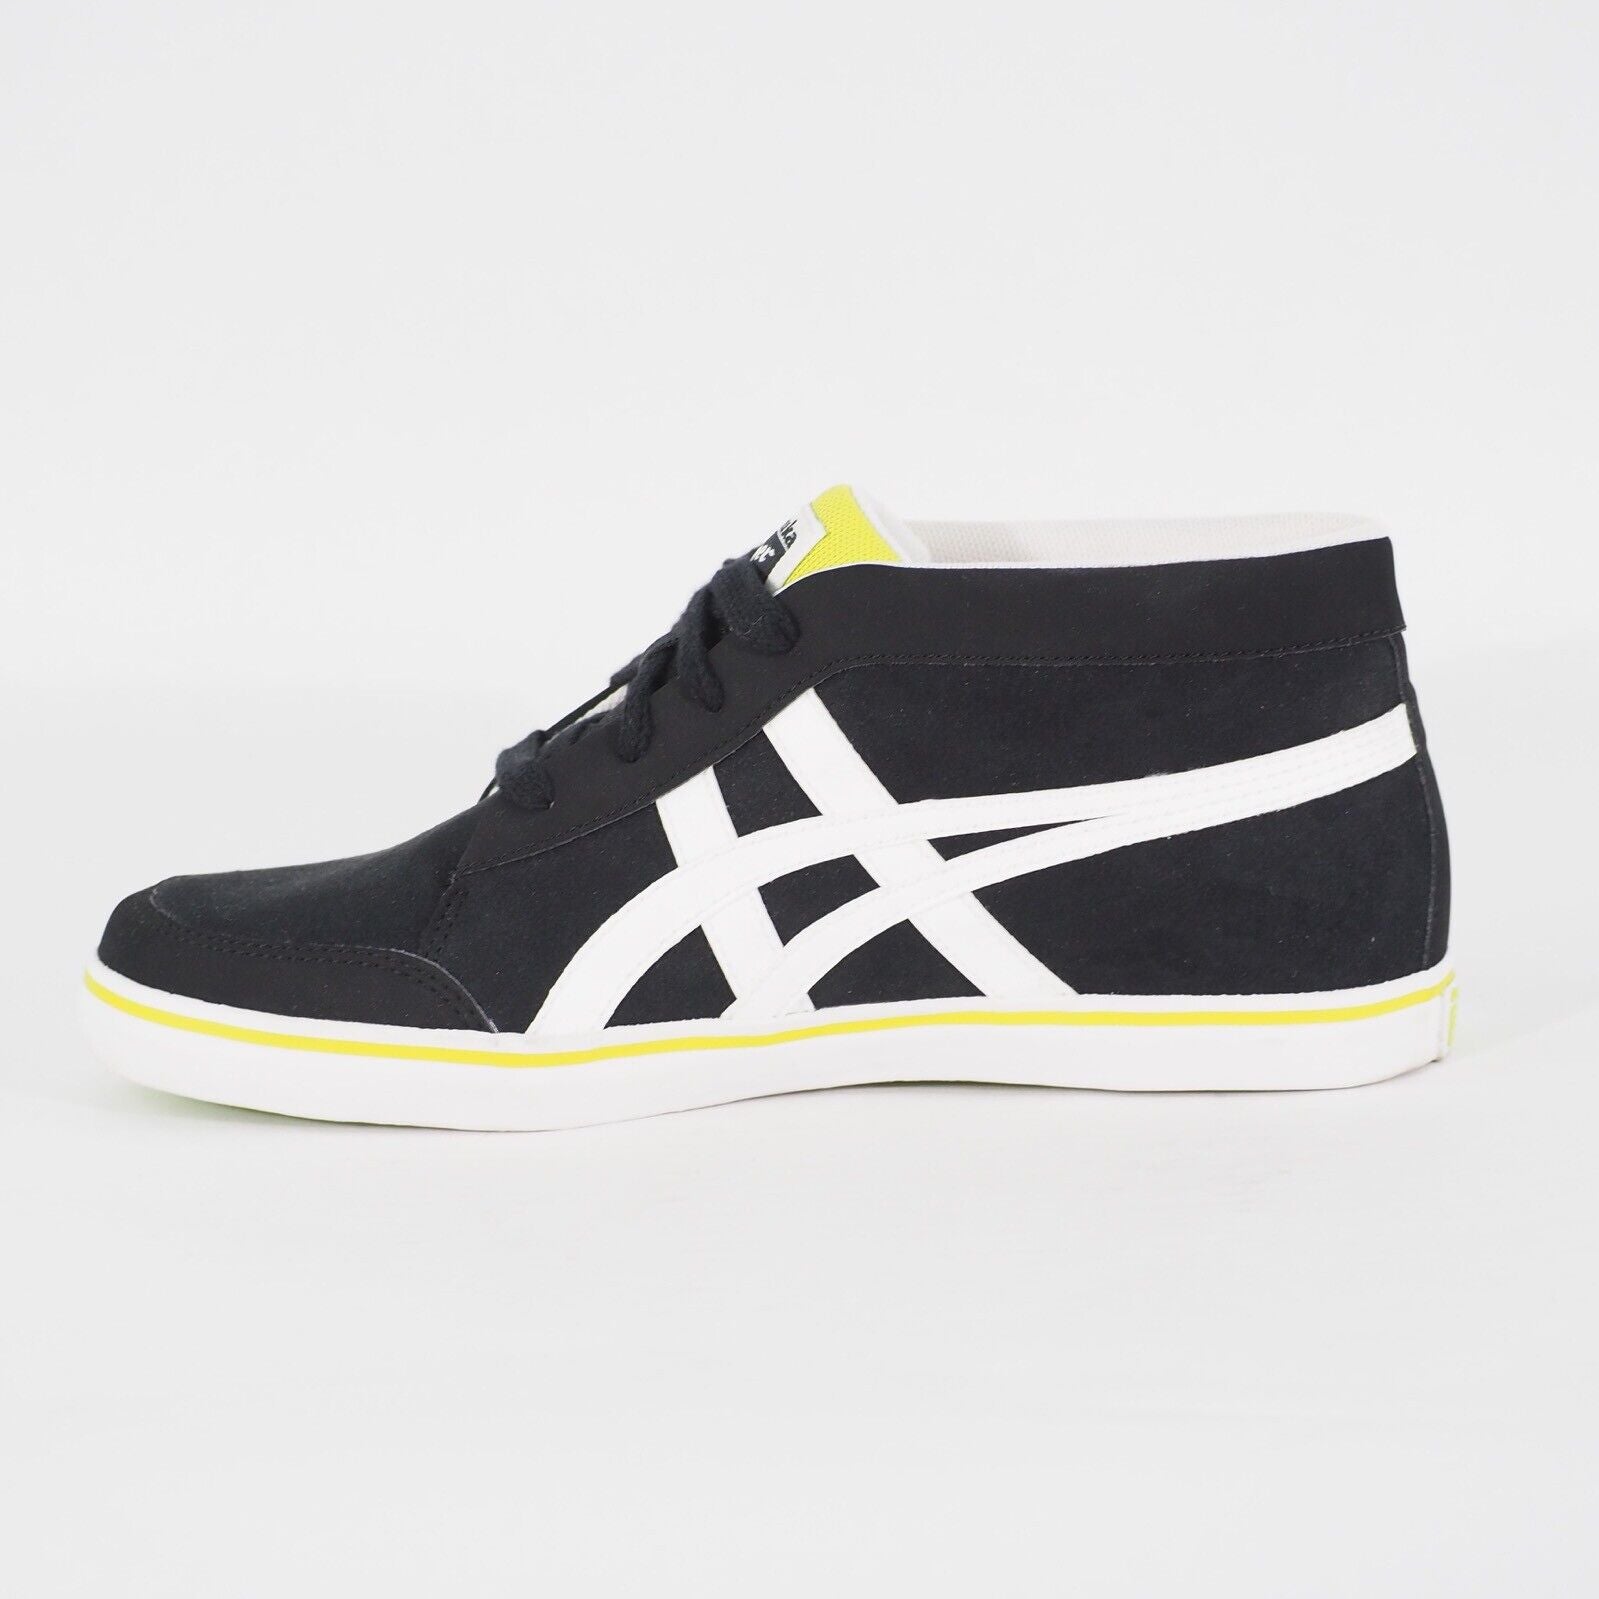 Adults Asics Onitsuka Tiger Renshi D3C4Y Black Casual Lace Up Walking Trainers